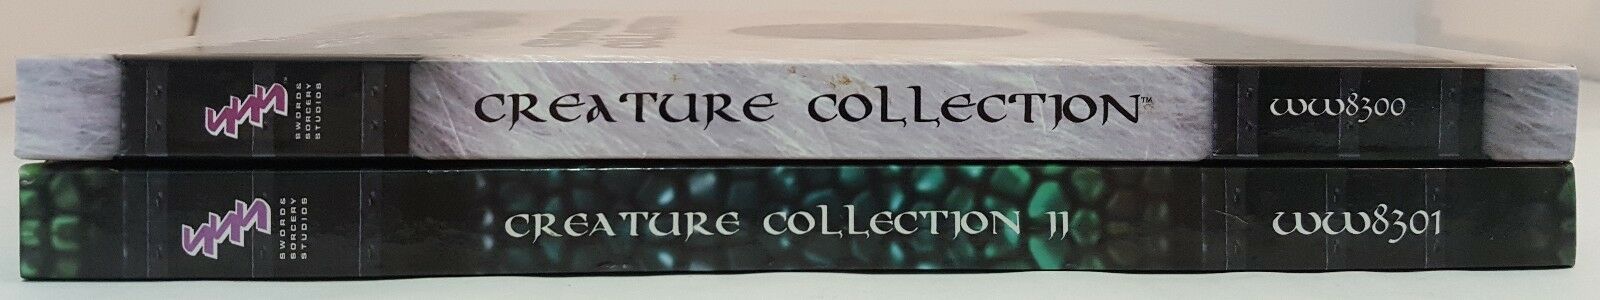 Lot Of 2 Sword & Sorcery Creature Collection Core Rulebook 1 & 2: Dark Menagerie